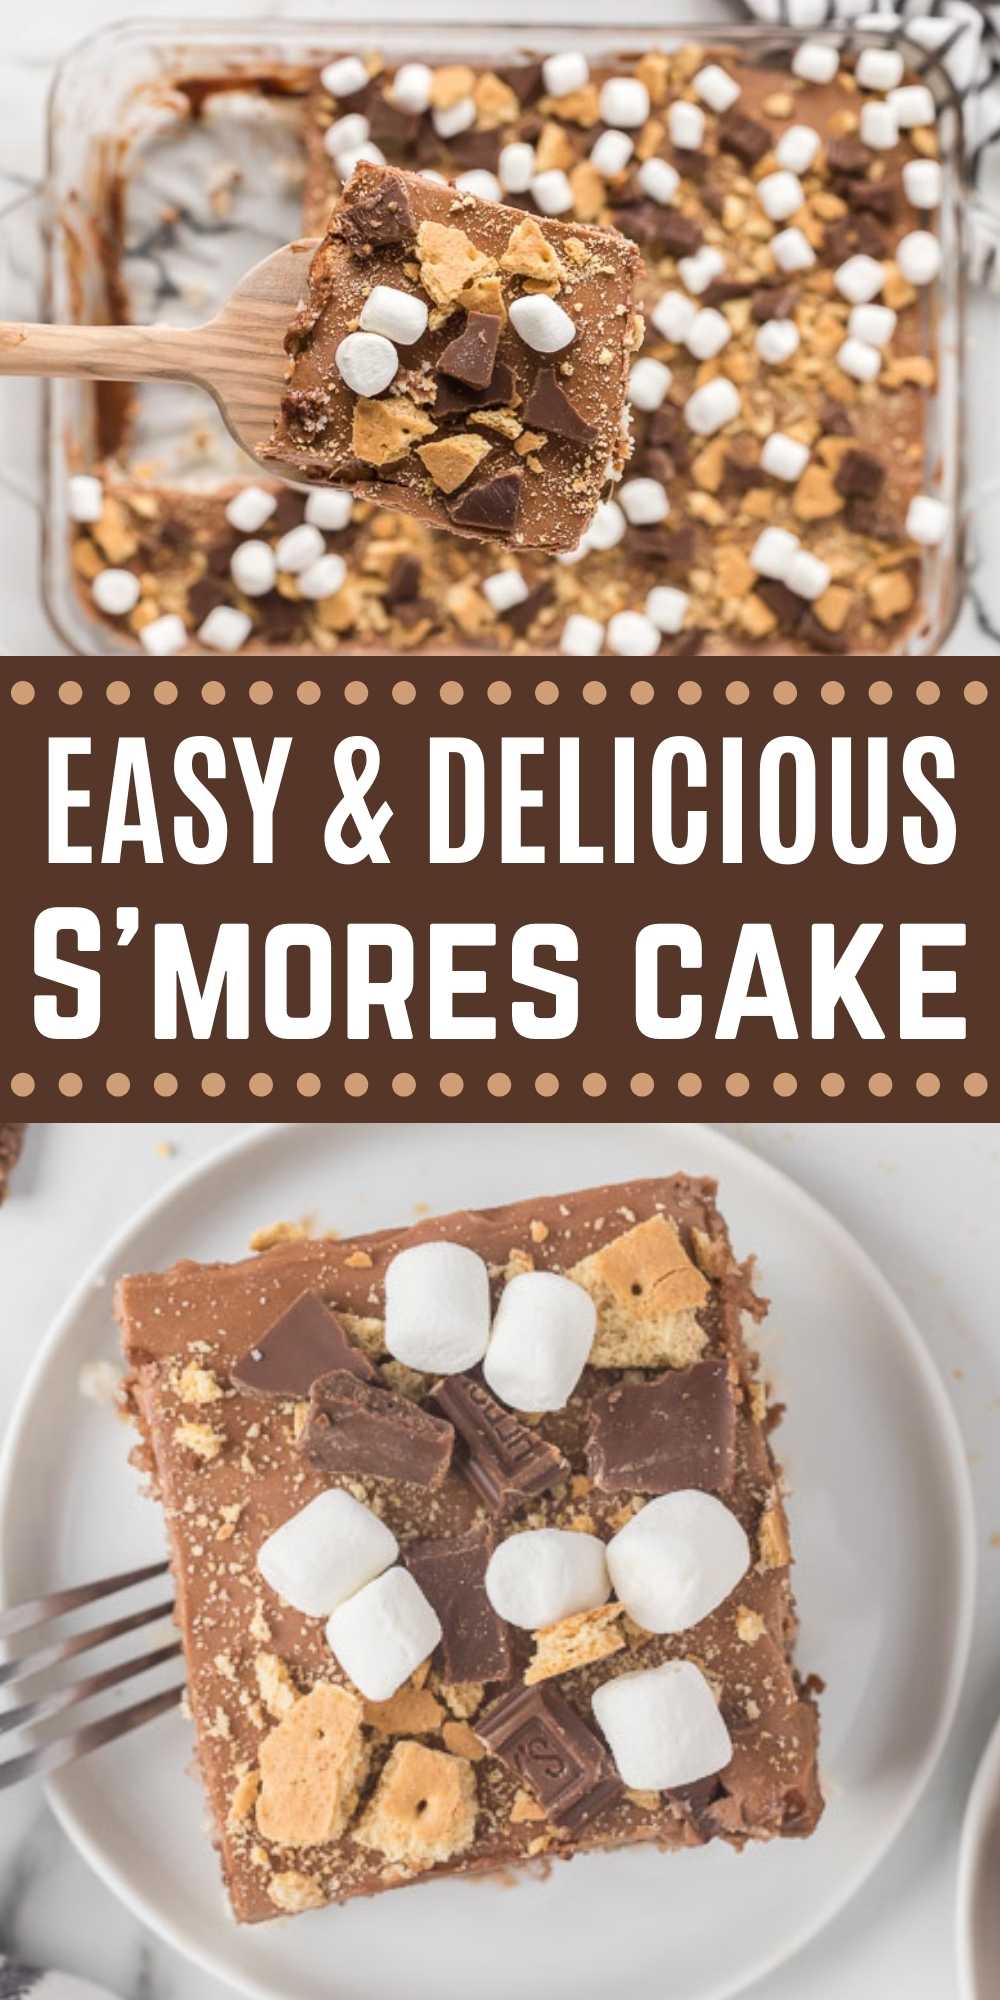 This S'mores cake recipe will be a hit! It's moist and delicious. S'mores poke cake is loaded with chocolate, marshmallow creme and more! You are going to love this easy to make s’mores poke cake recipe.  #eatingonadime #cakerecipes #easyrecipes #smoresrecipe 
